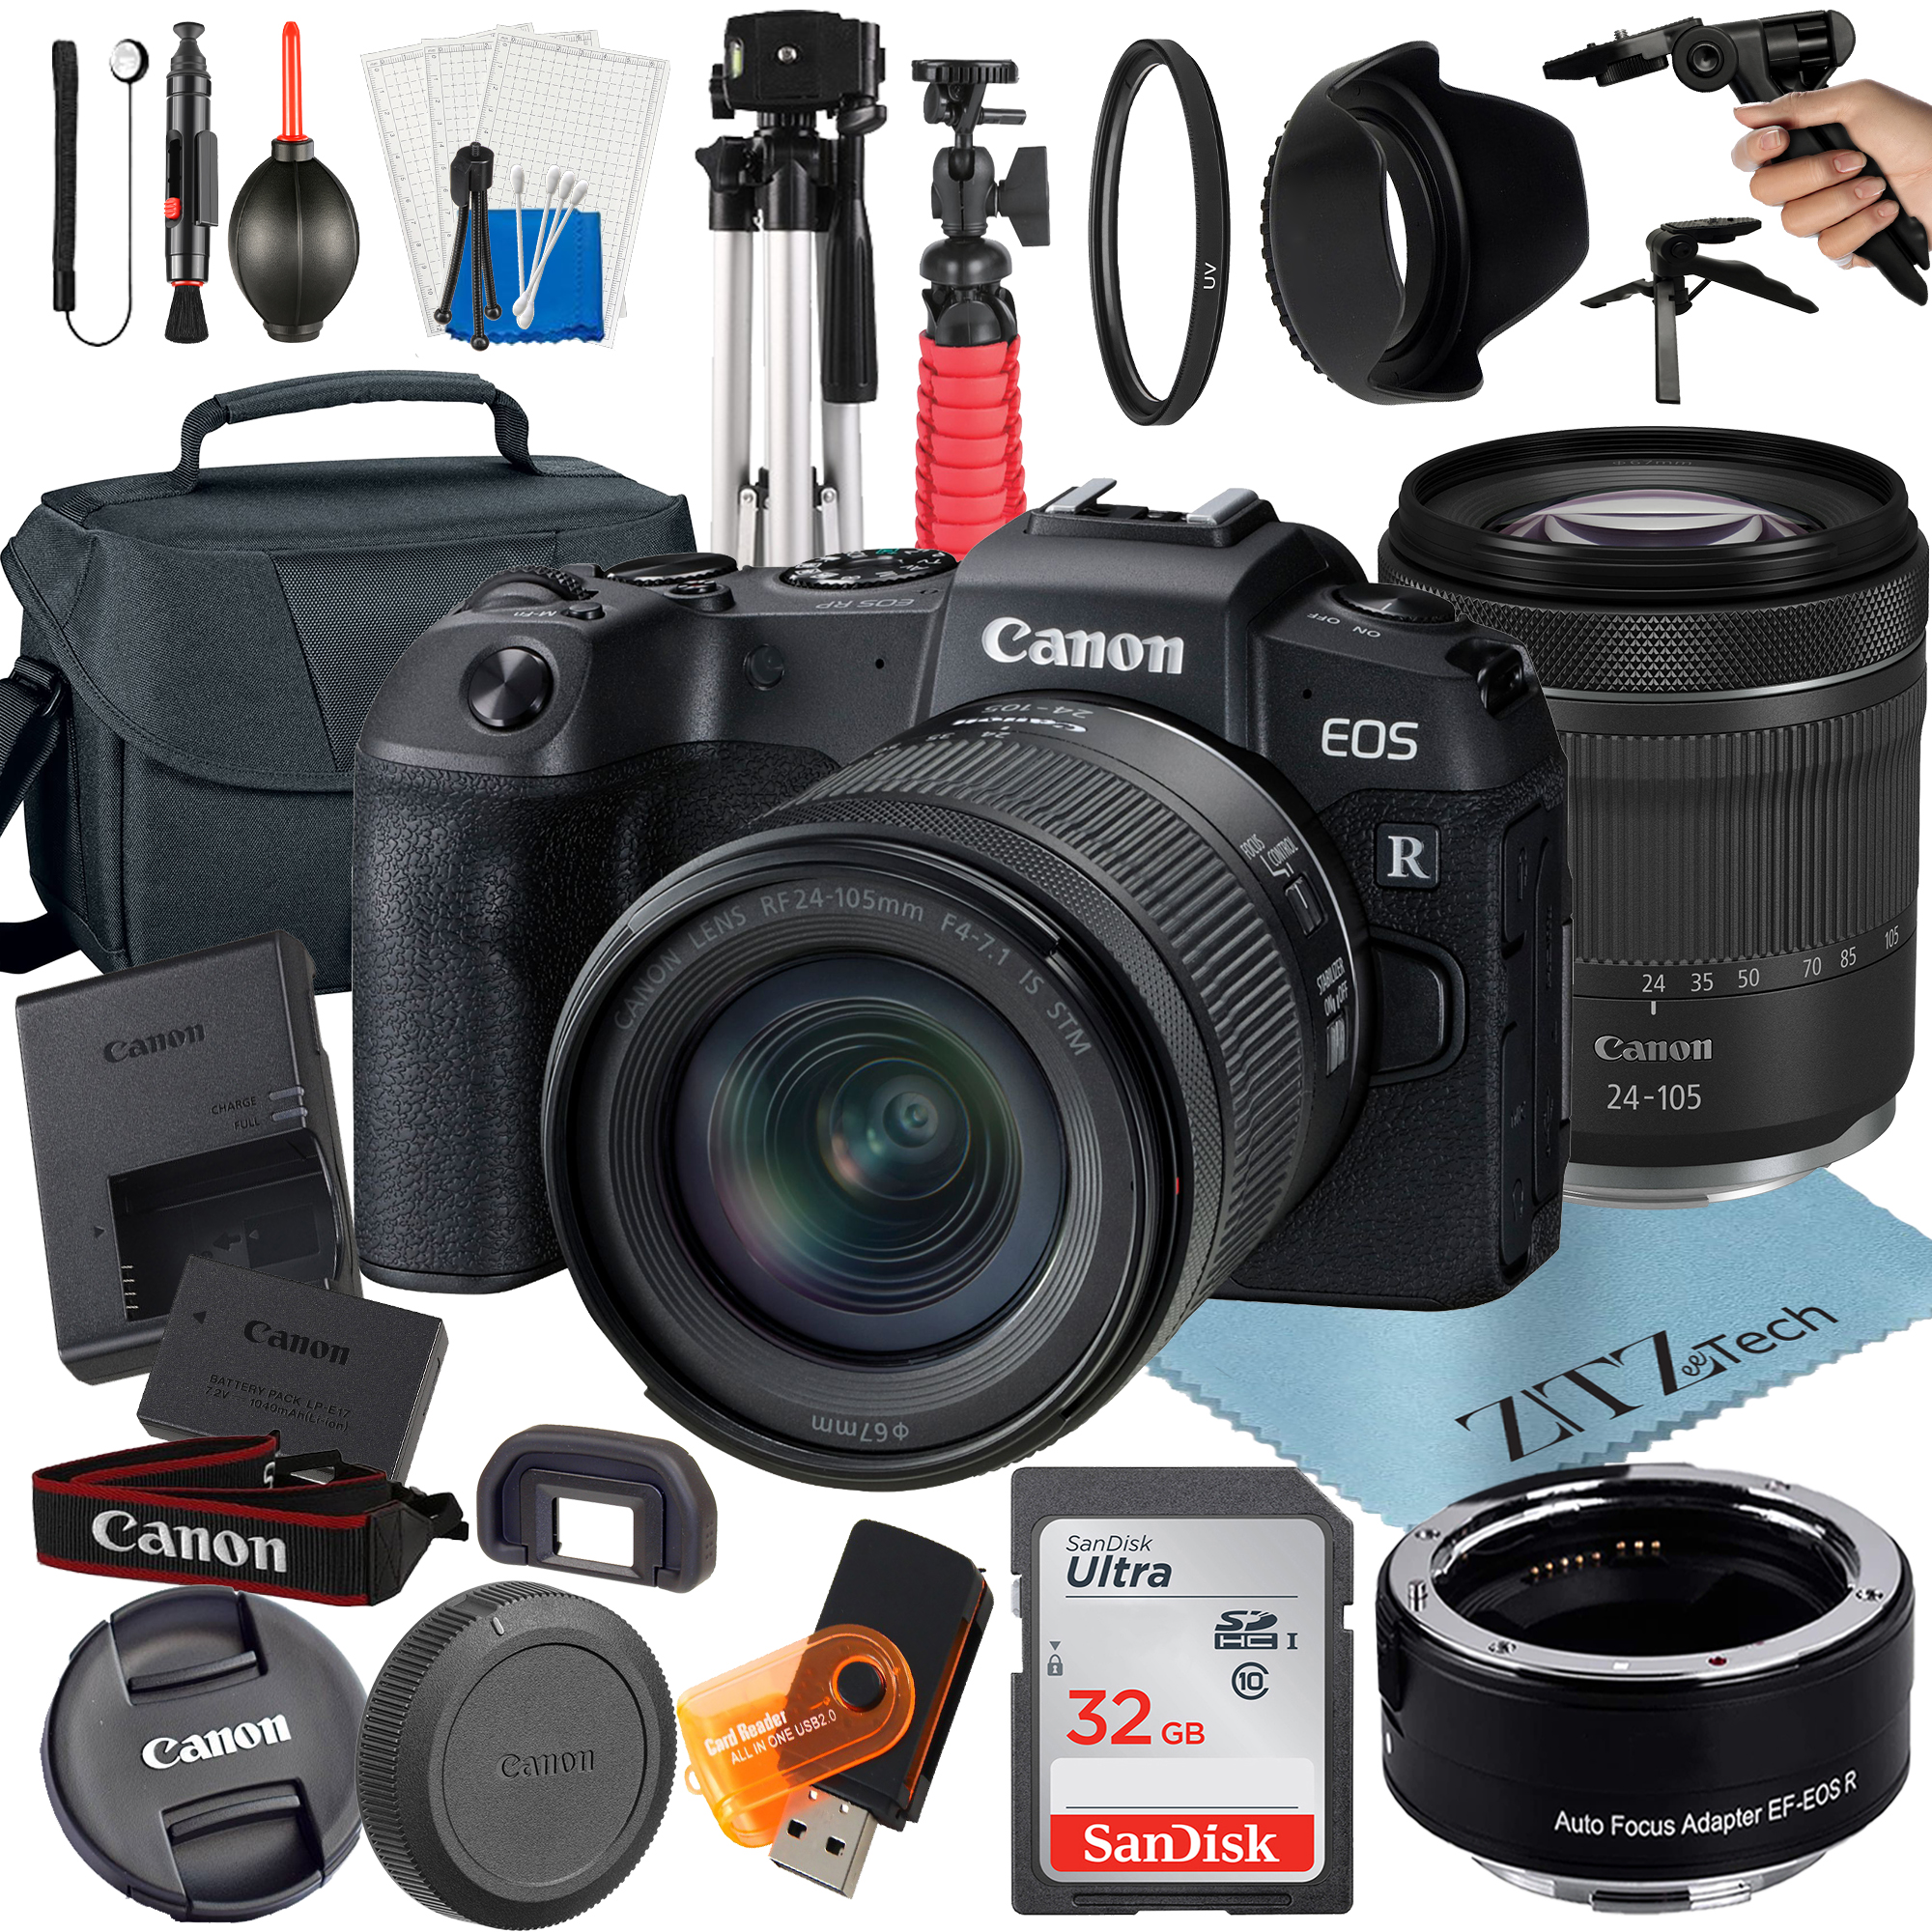 Canon EOS RP Mirrorless Digital Camera with RF 24-105mm STM Lens + Mount Adapter + 32GB SanDisk + ZeeTech Accessory